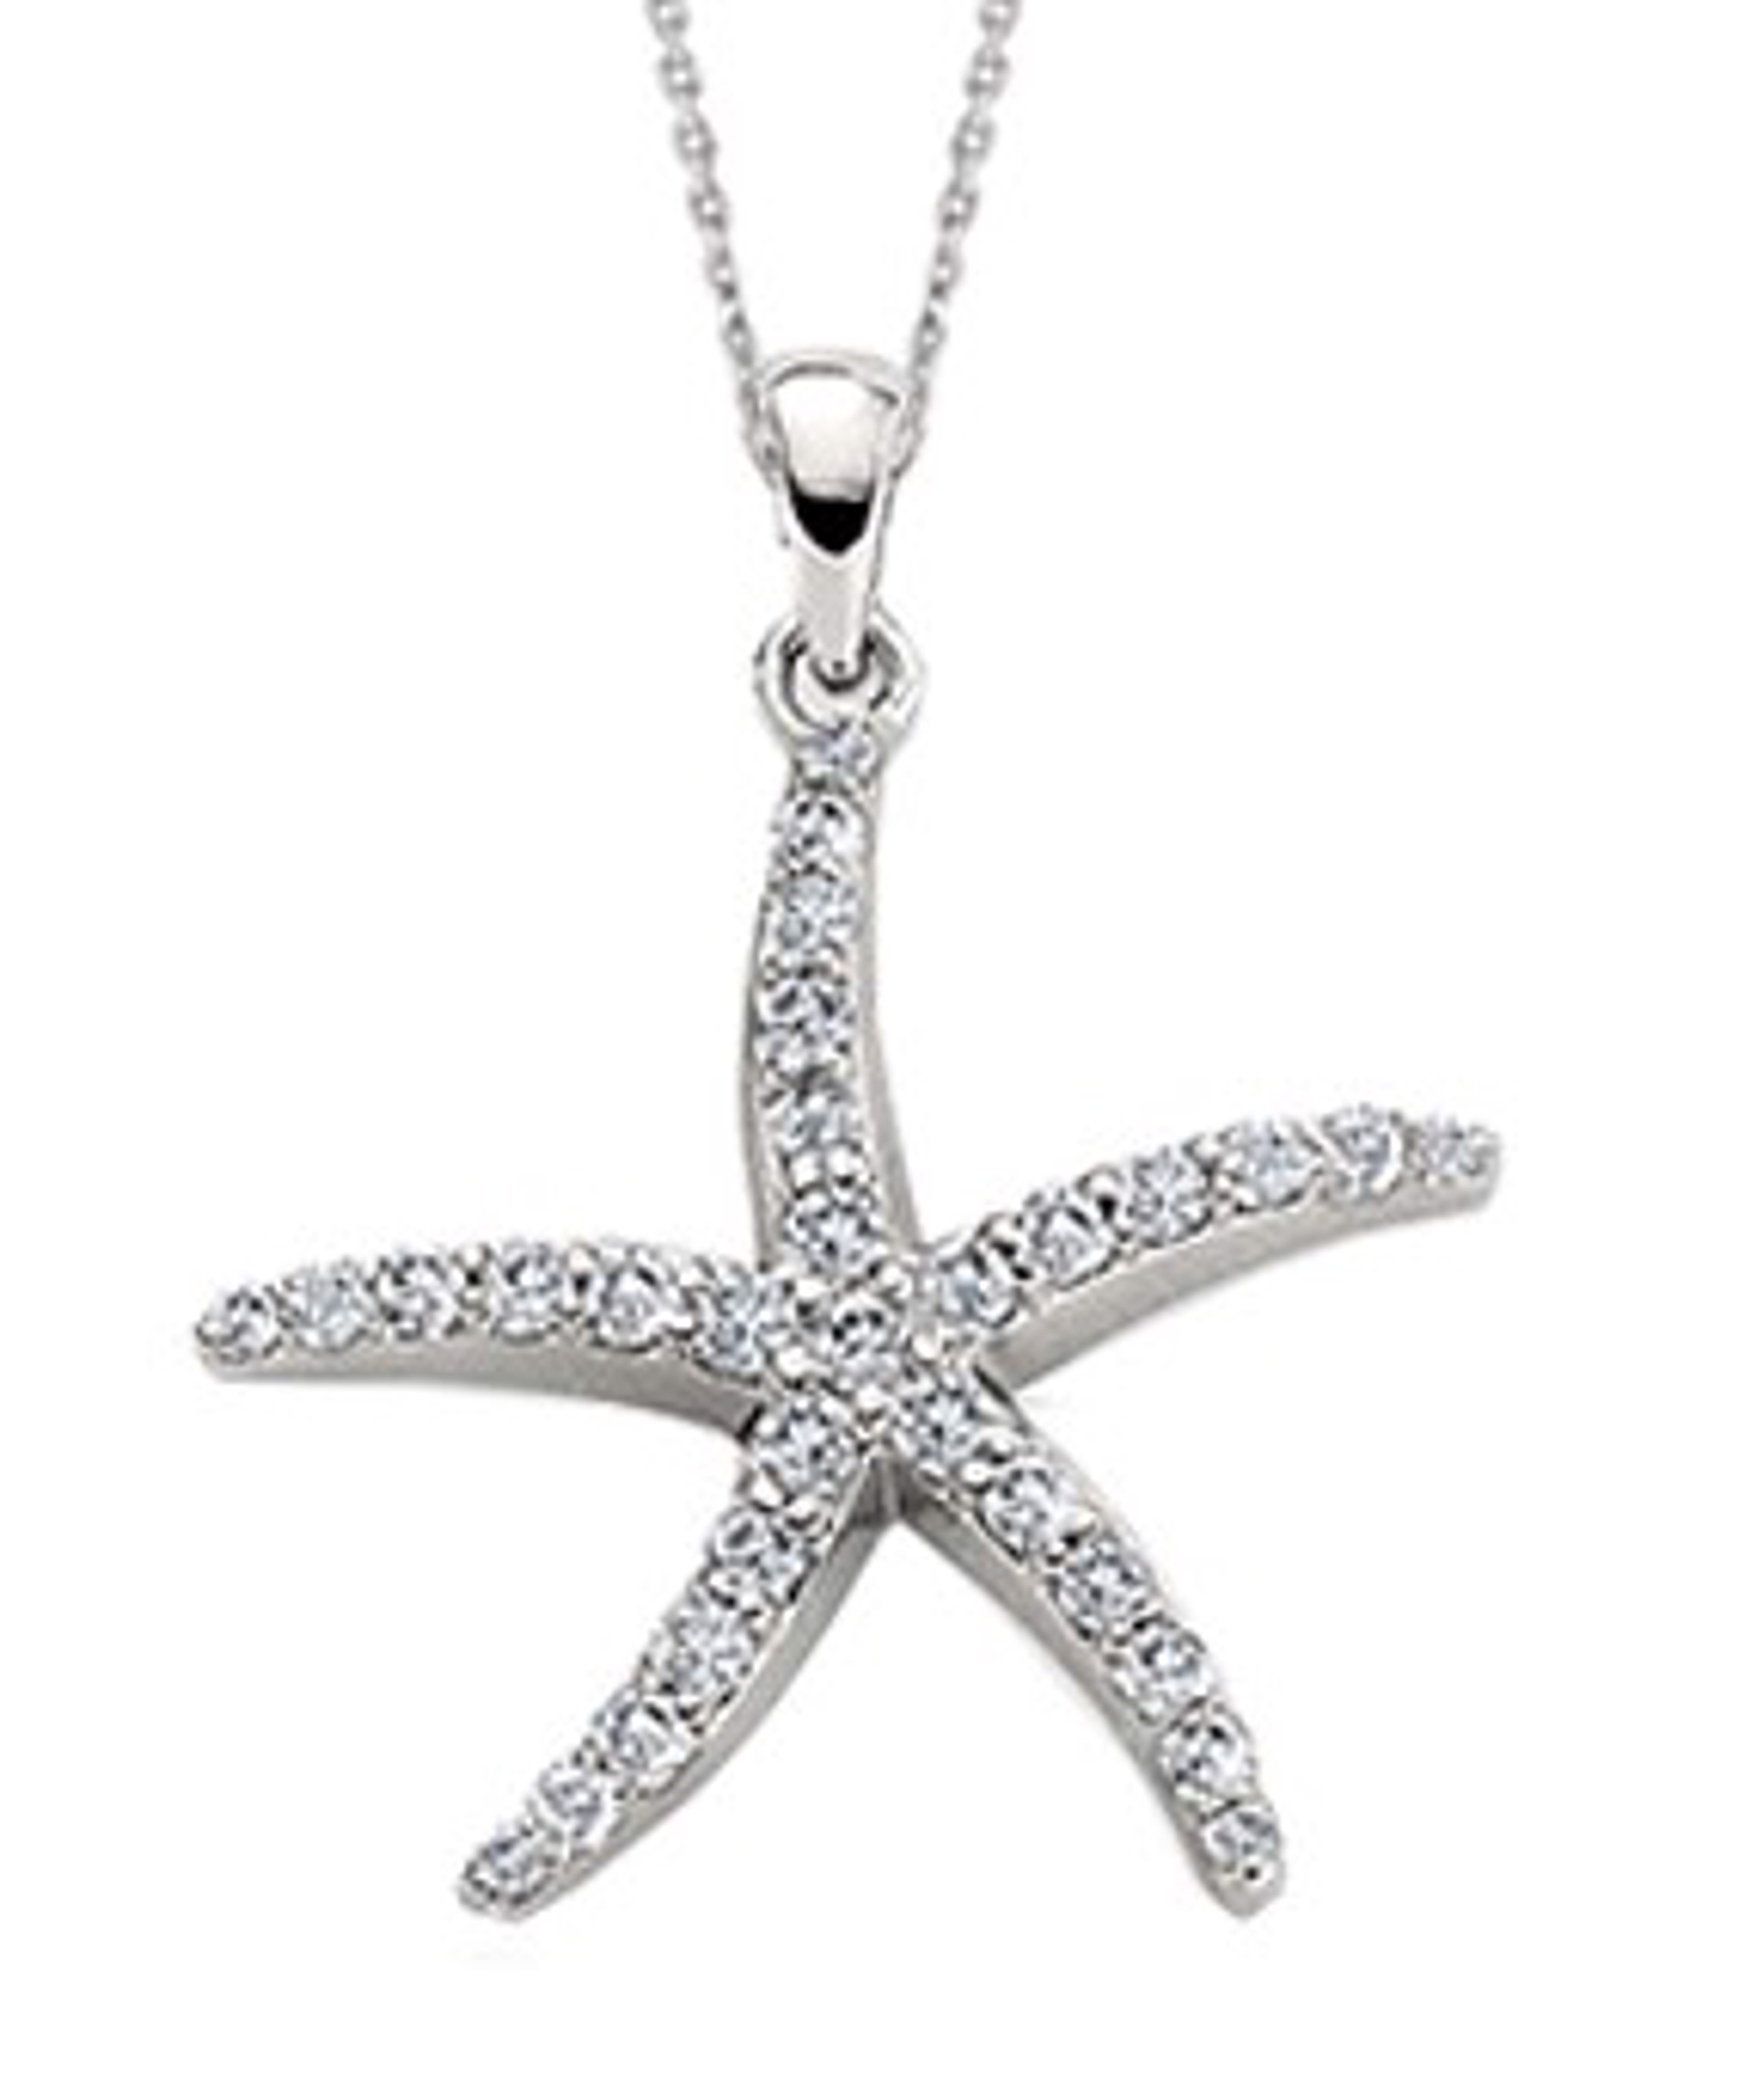 Starfish Necklace, 1/2 ct by Sharon Amber